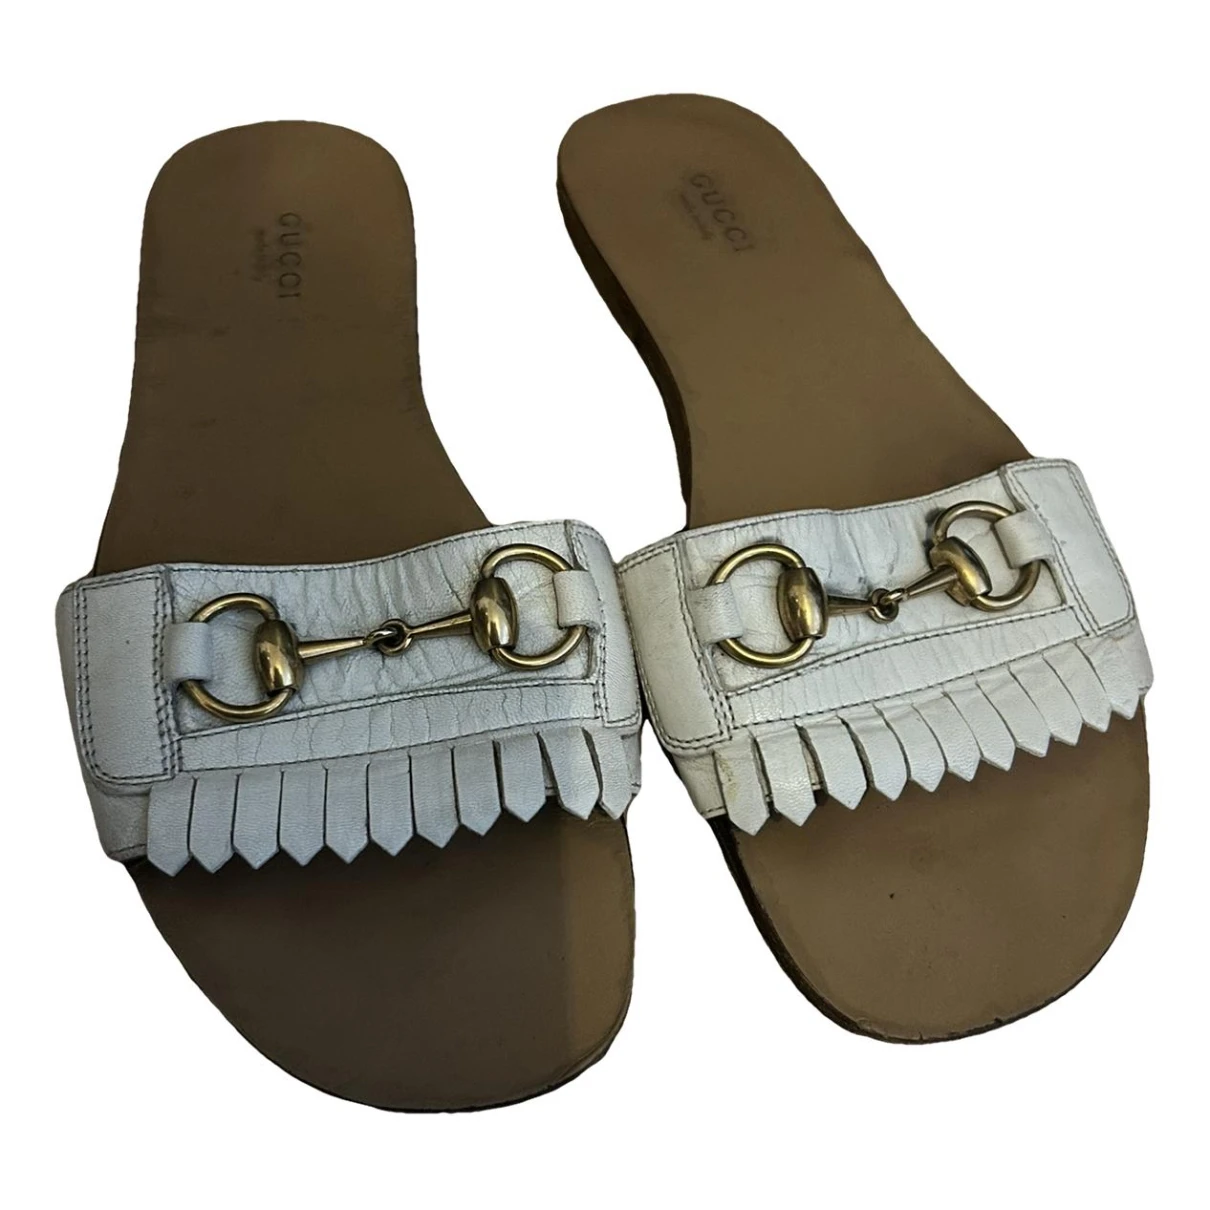 Pre-owned Gucci Leather Sandal In White